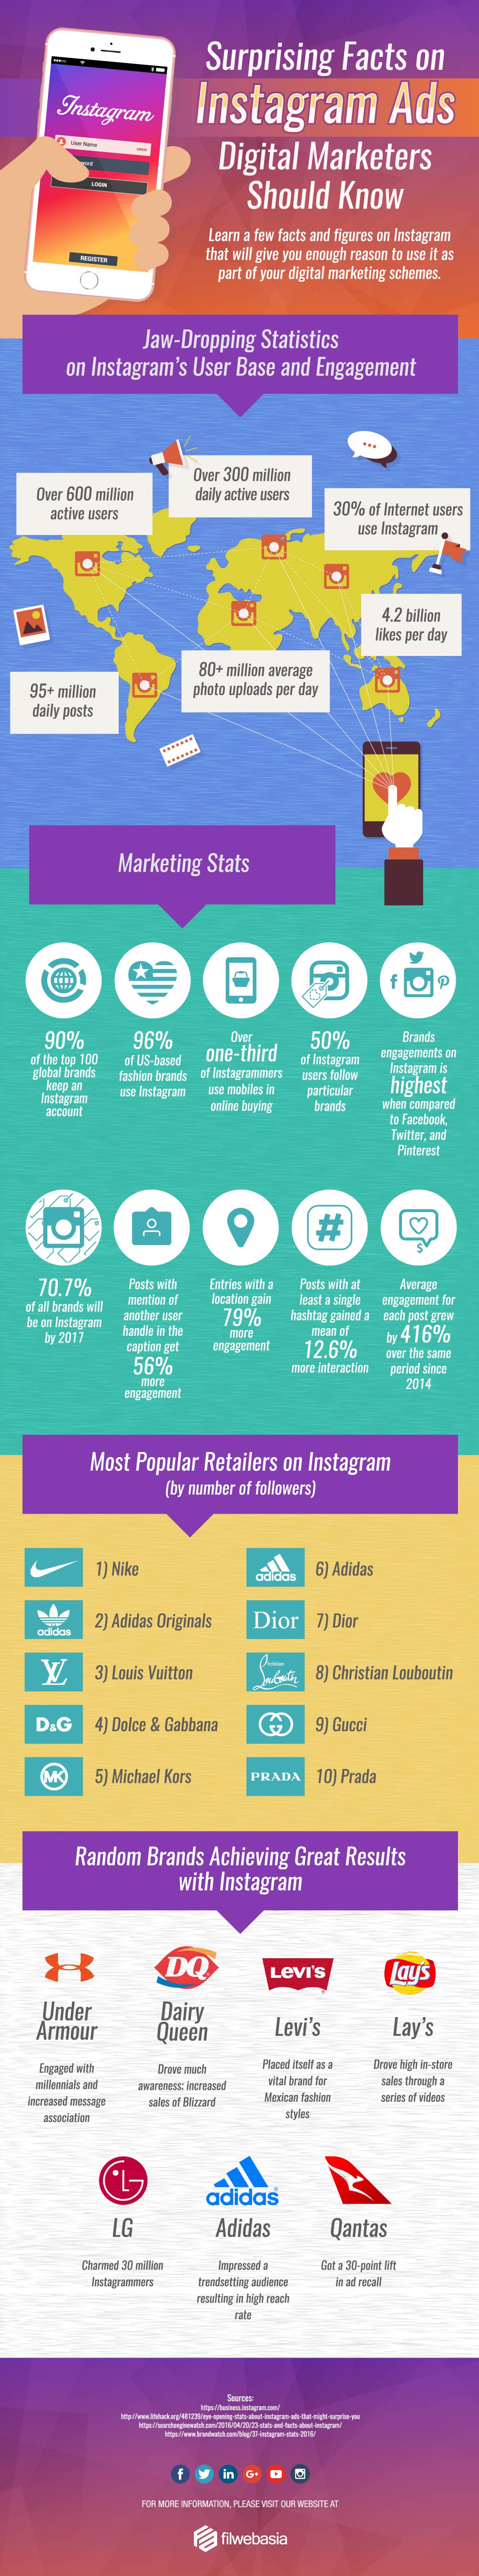 about Instagram ads infographic